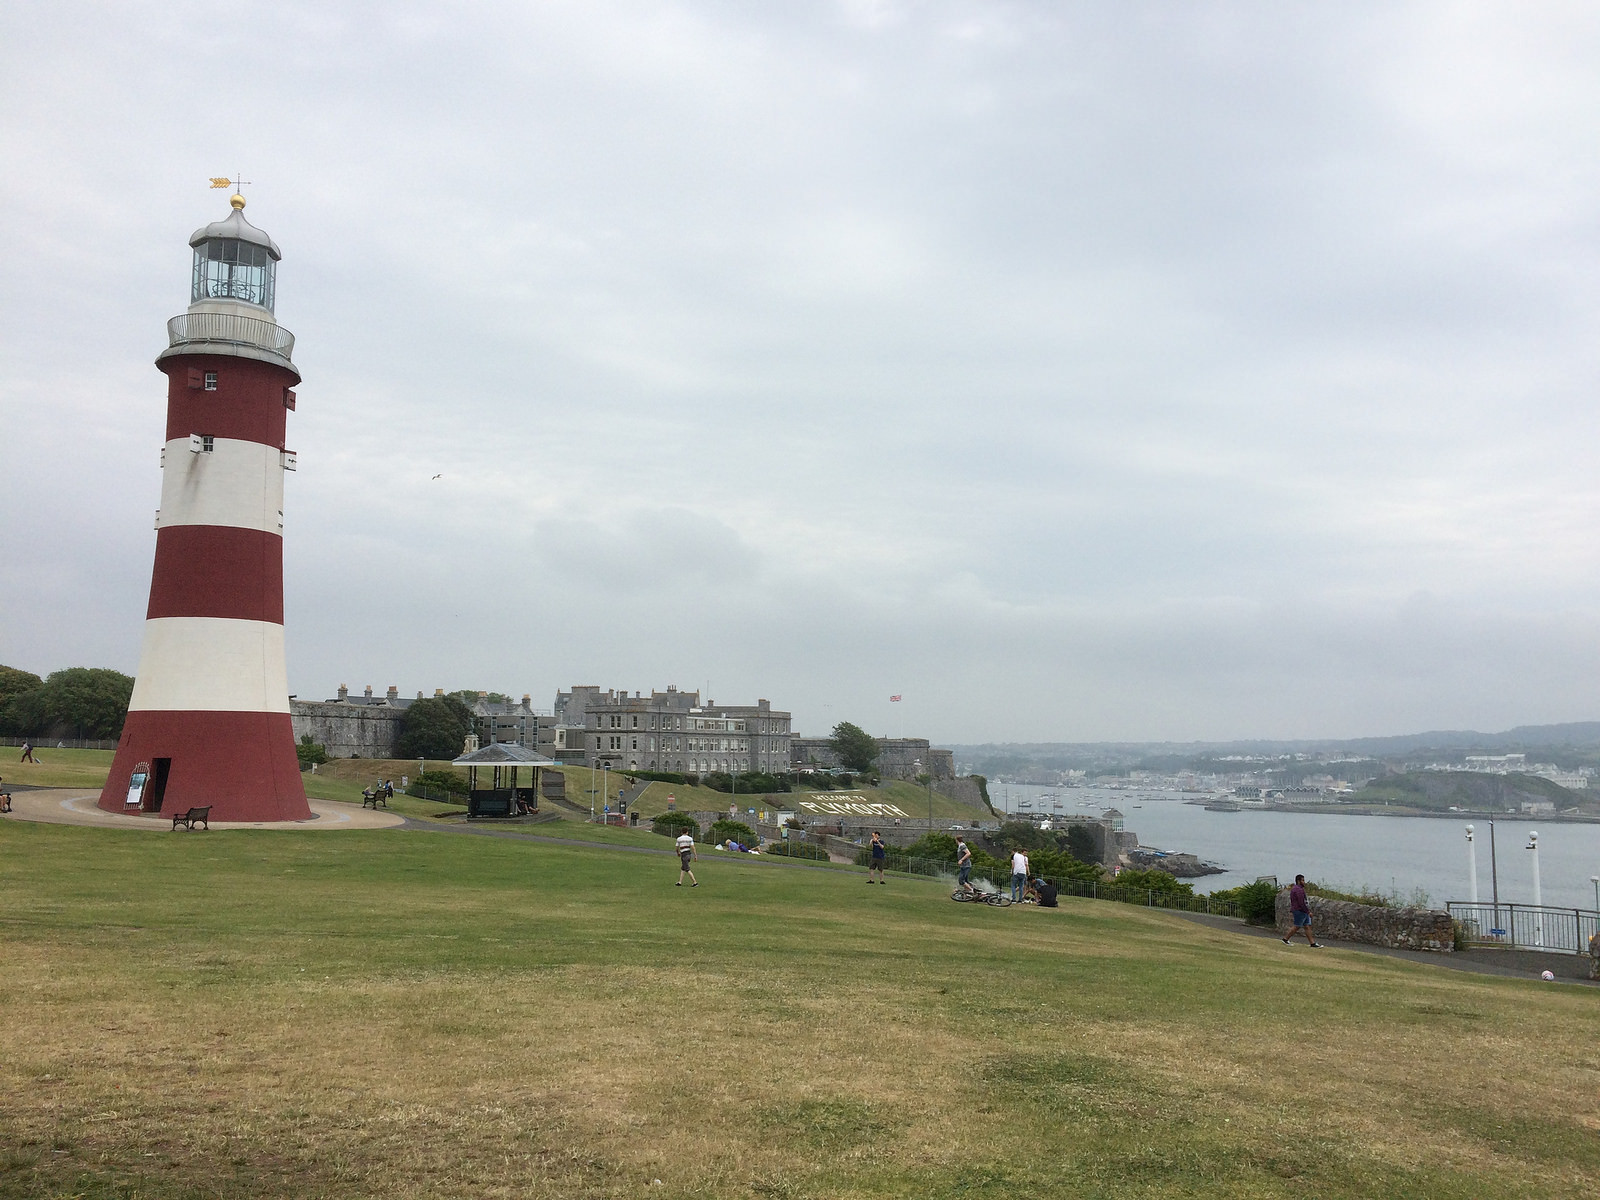 Plymouth Hoe | Tourist attraction | Wikitour.io